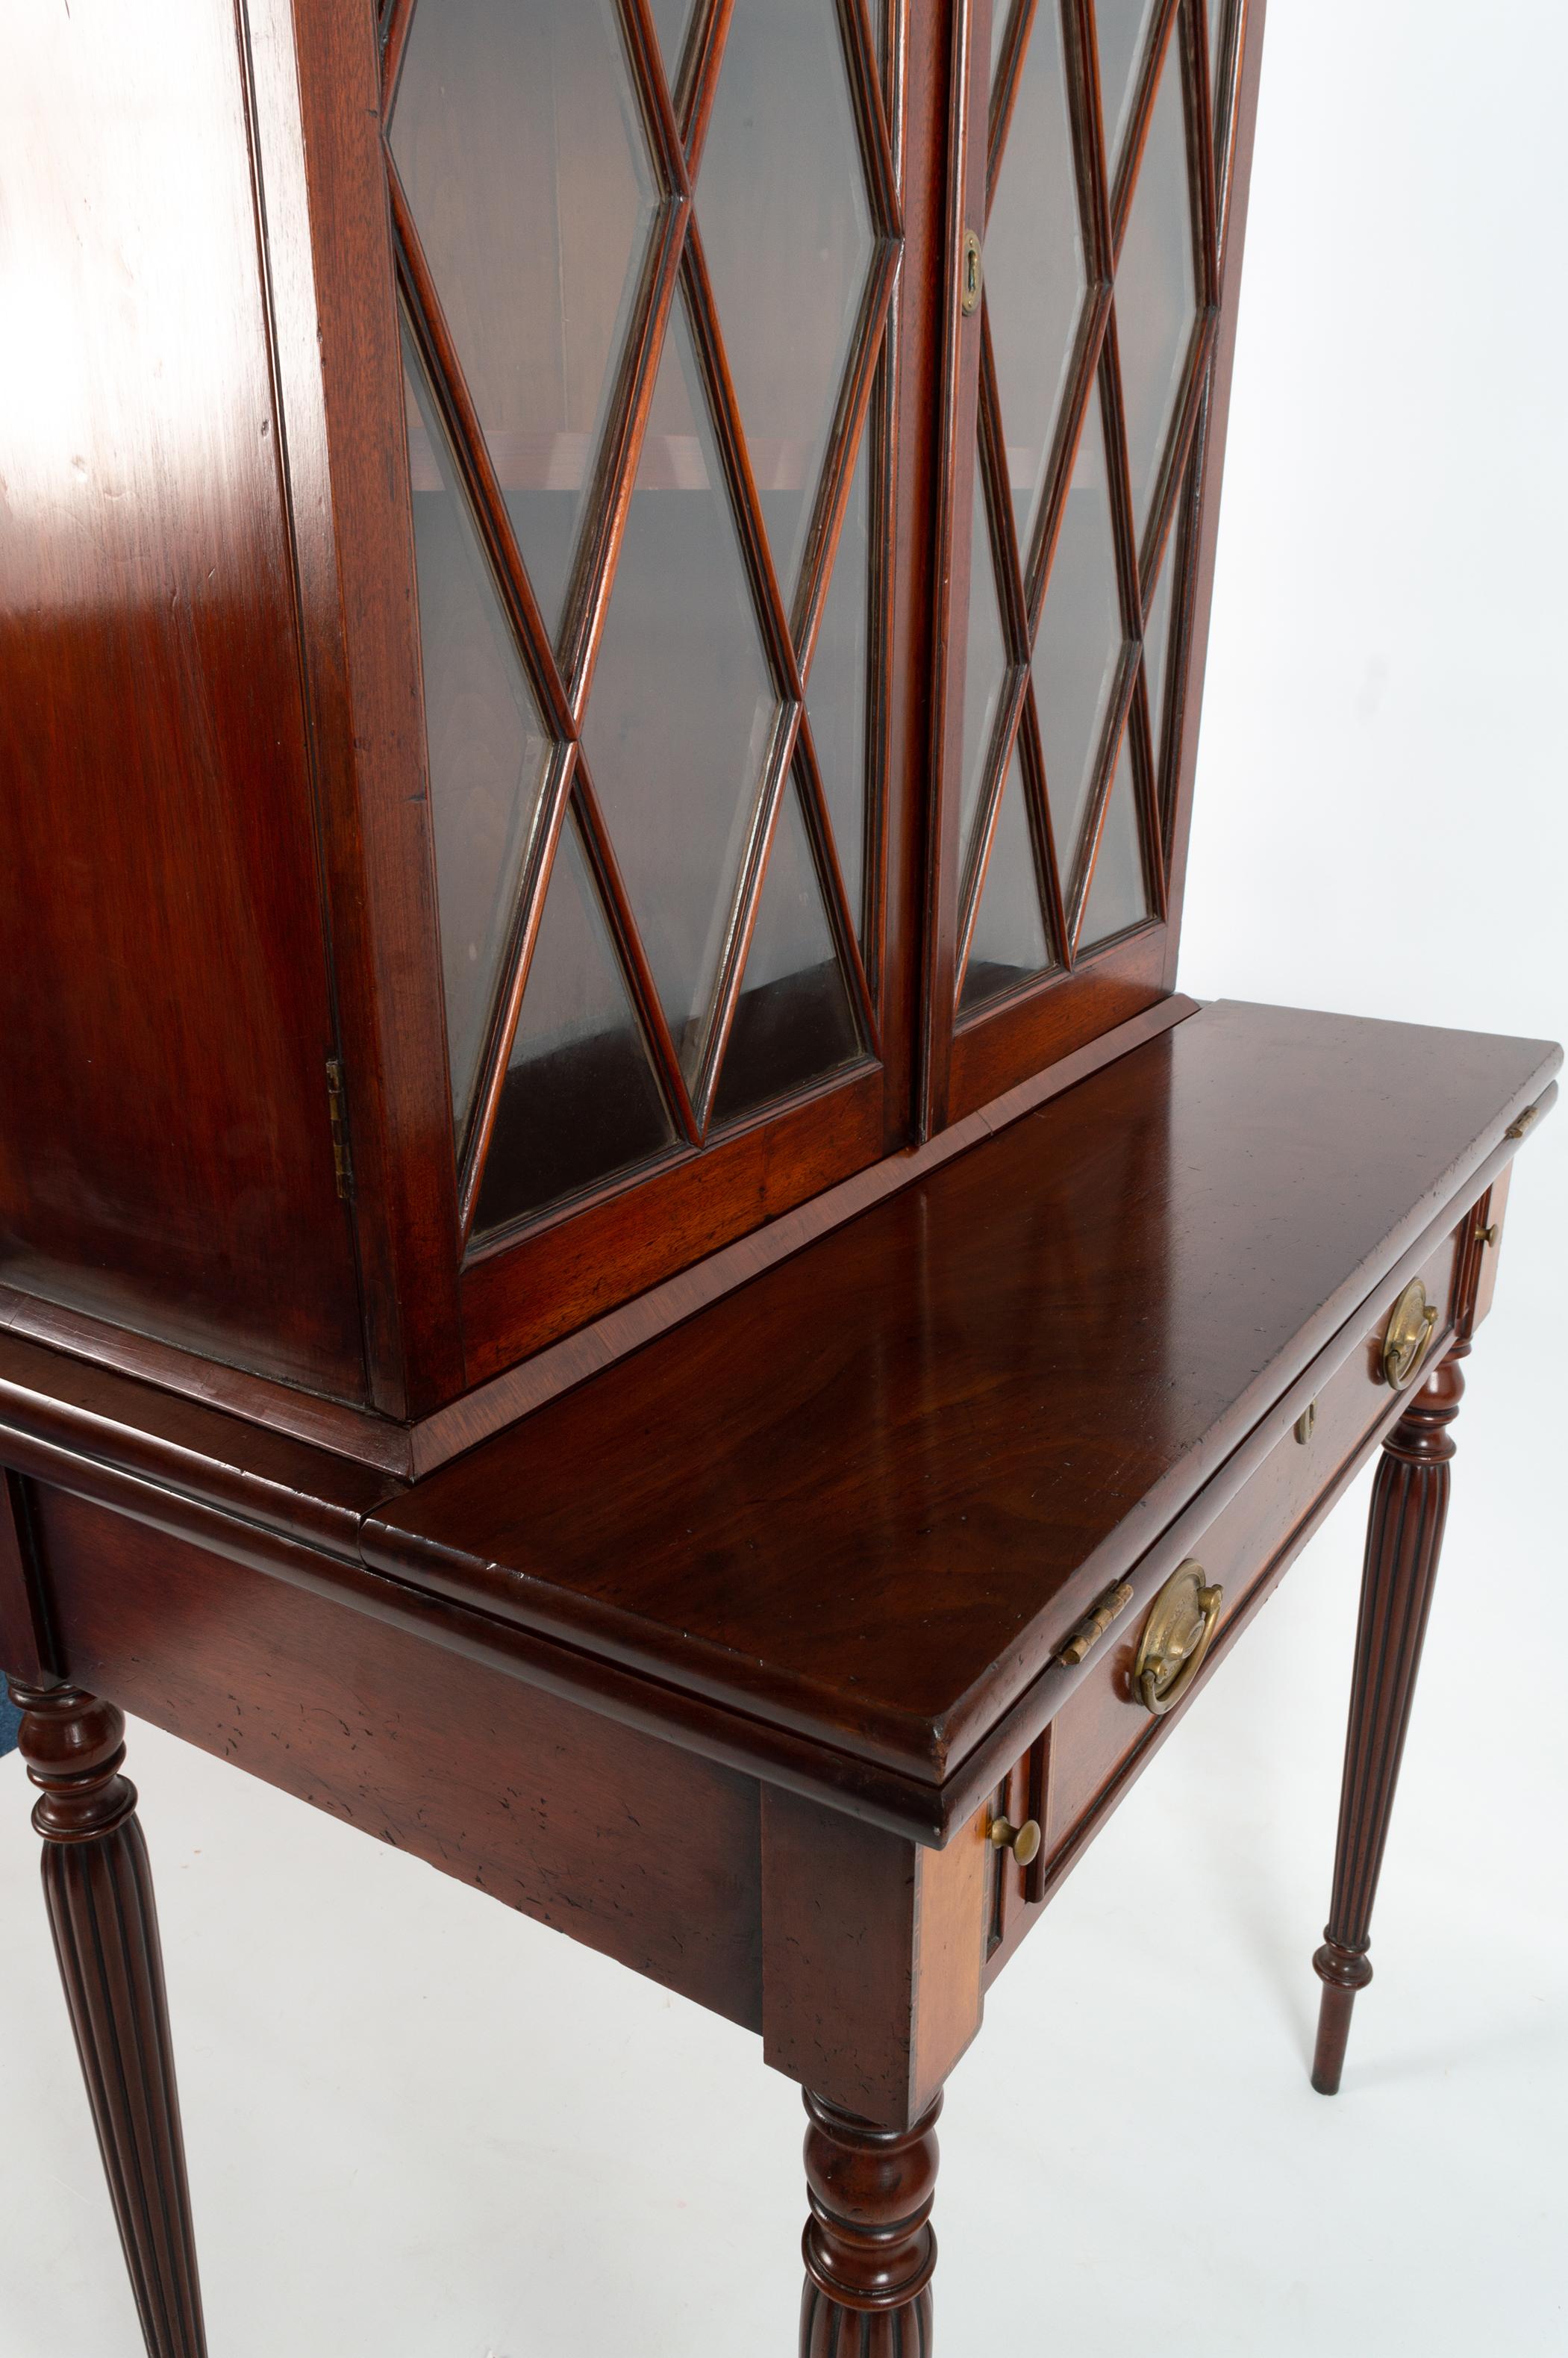 Antique English 19th Century Sheraton Revival Mahogany Display Cabinet on Stand  For Sale 9